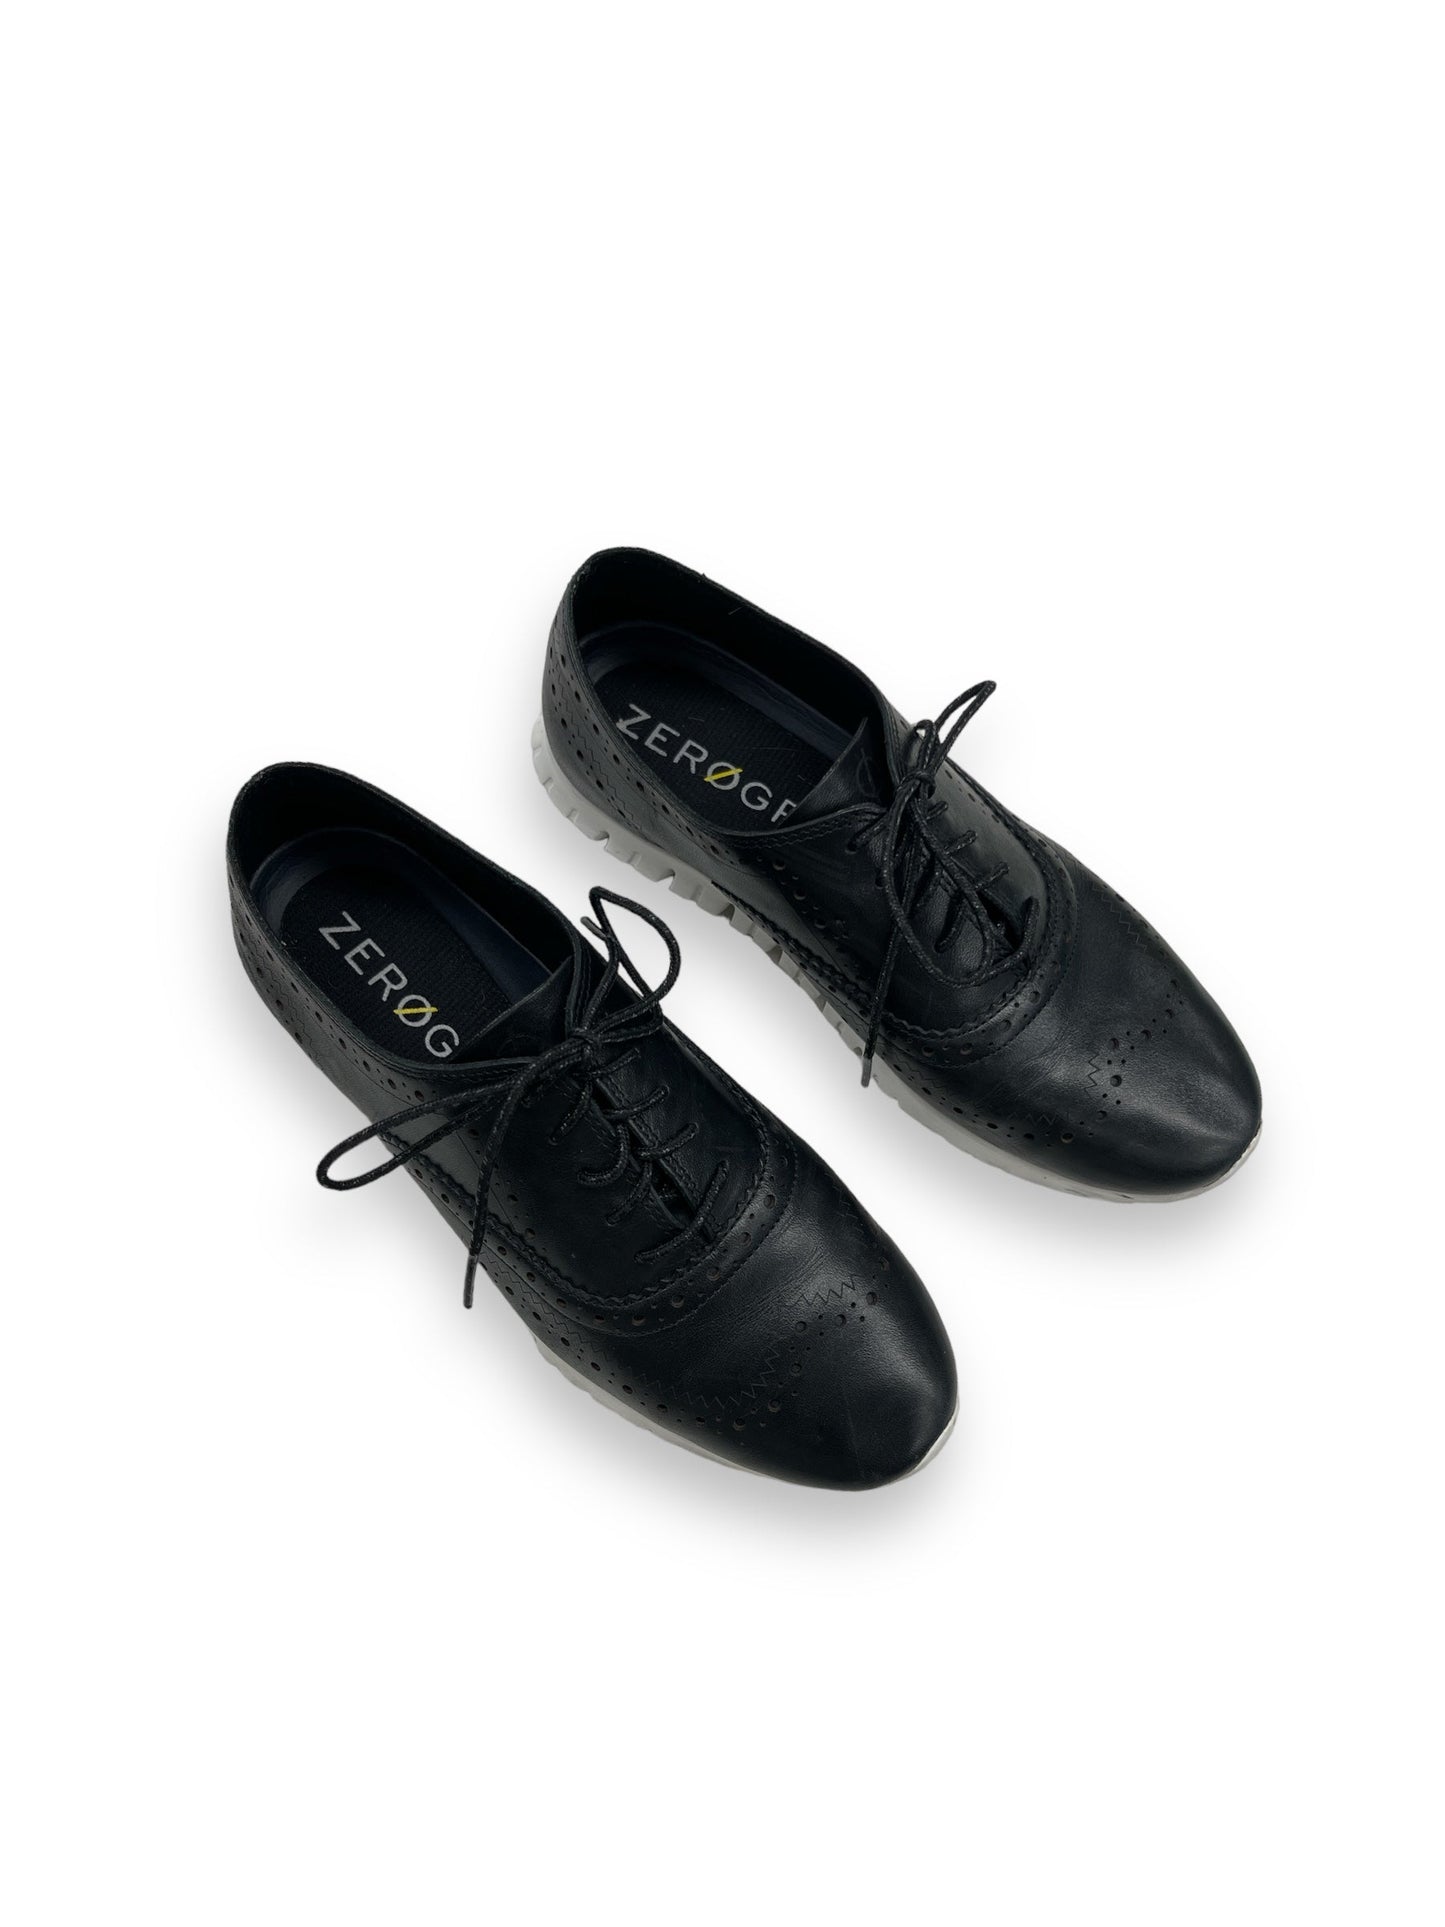 Shoes Flats Oxfords & Loafers By Cole-haan  Size: 6.5